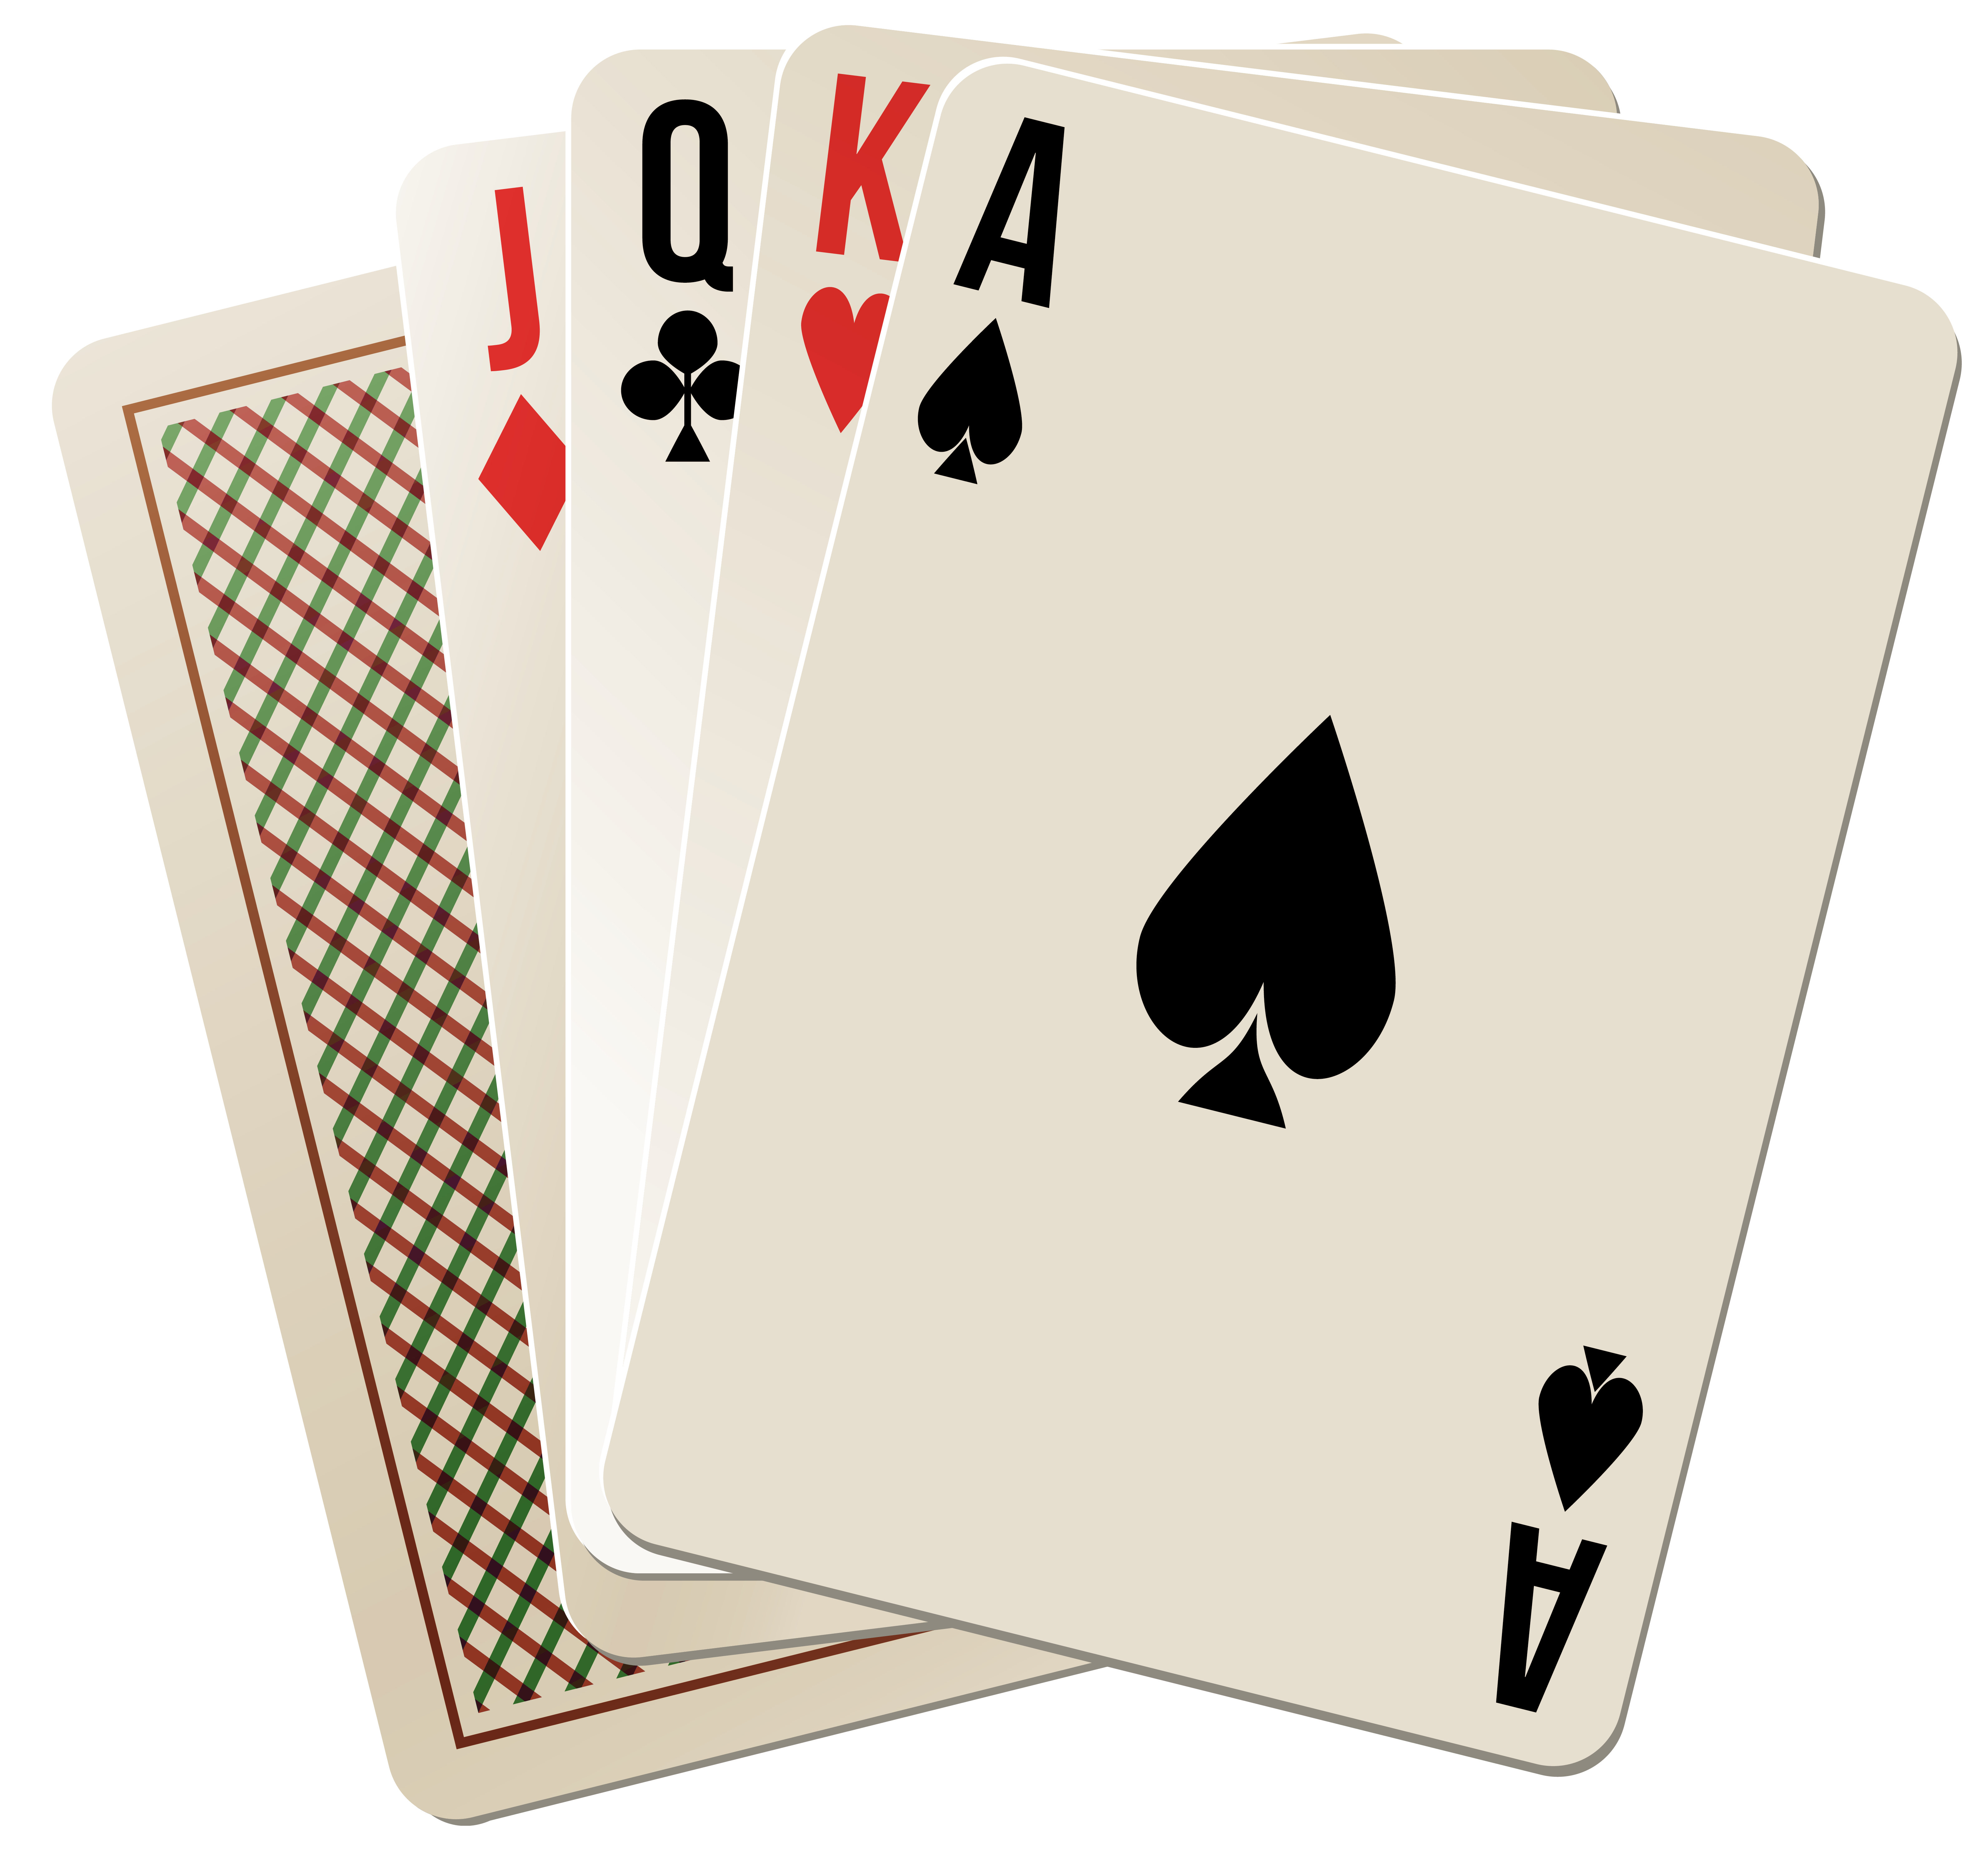 free clipart images playing cards - photo #49